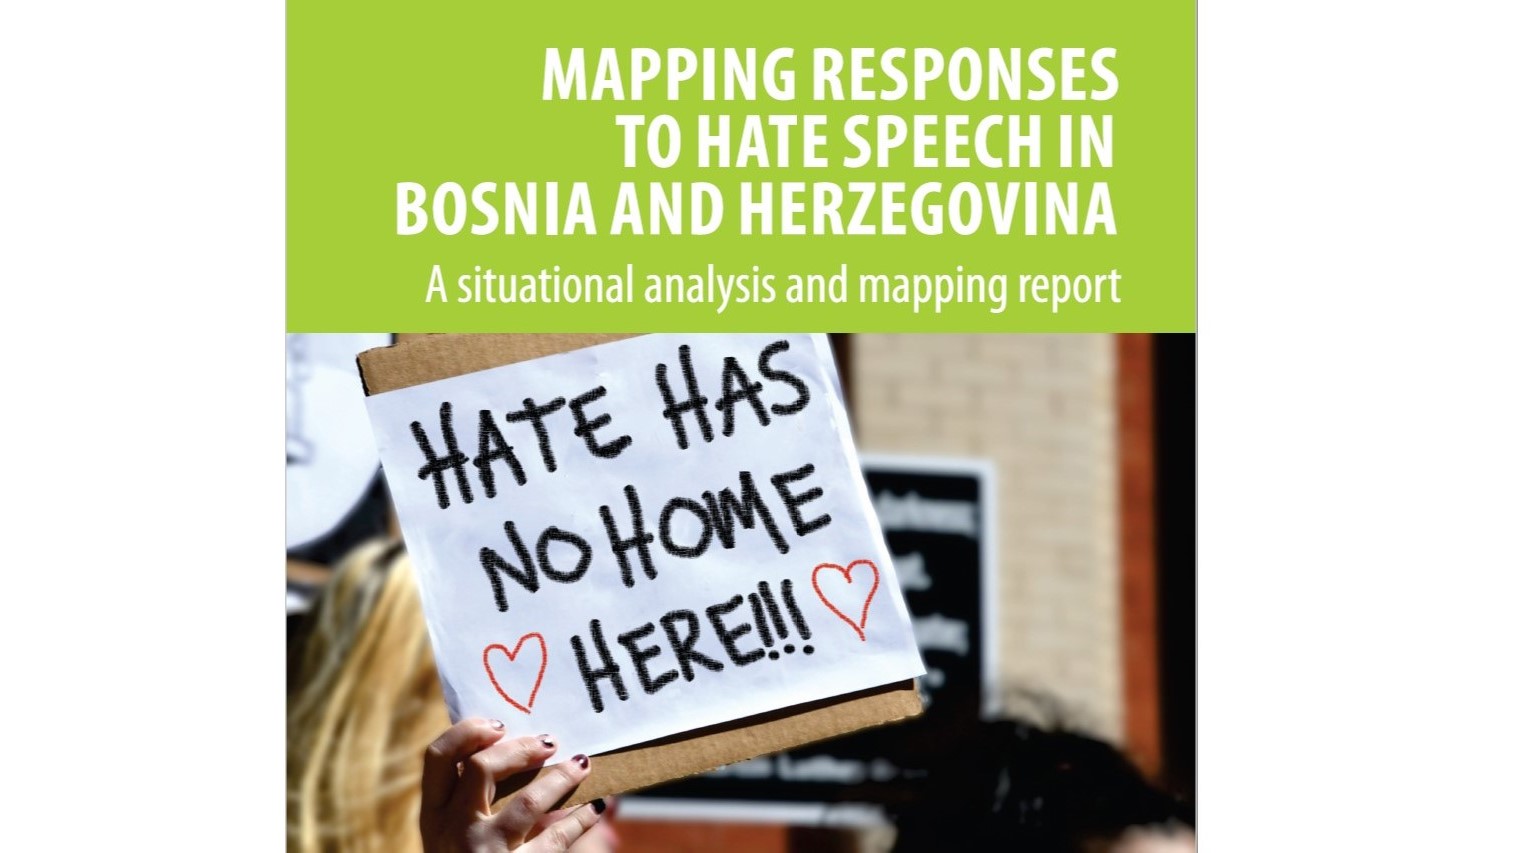 Support to the institutions of Bosnia and Herzegovina in combating hate speech